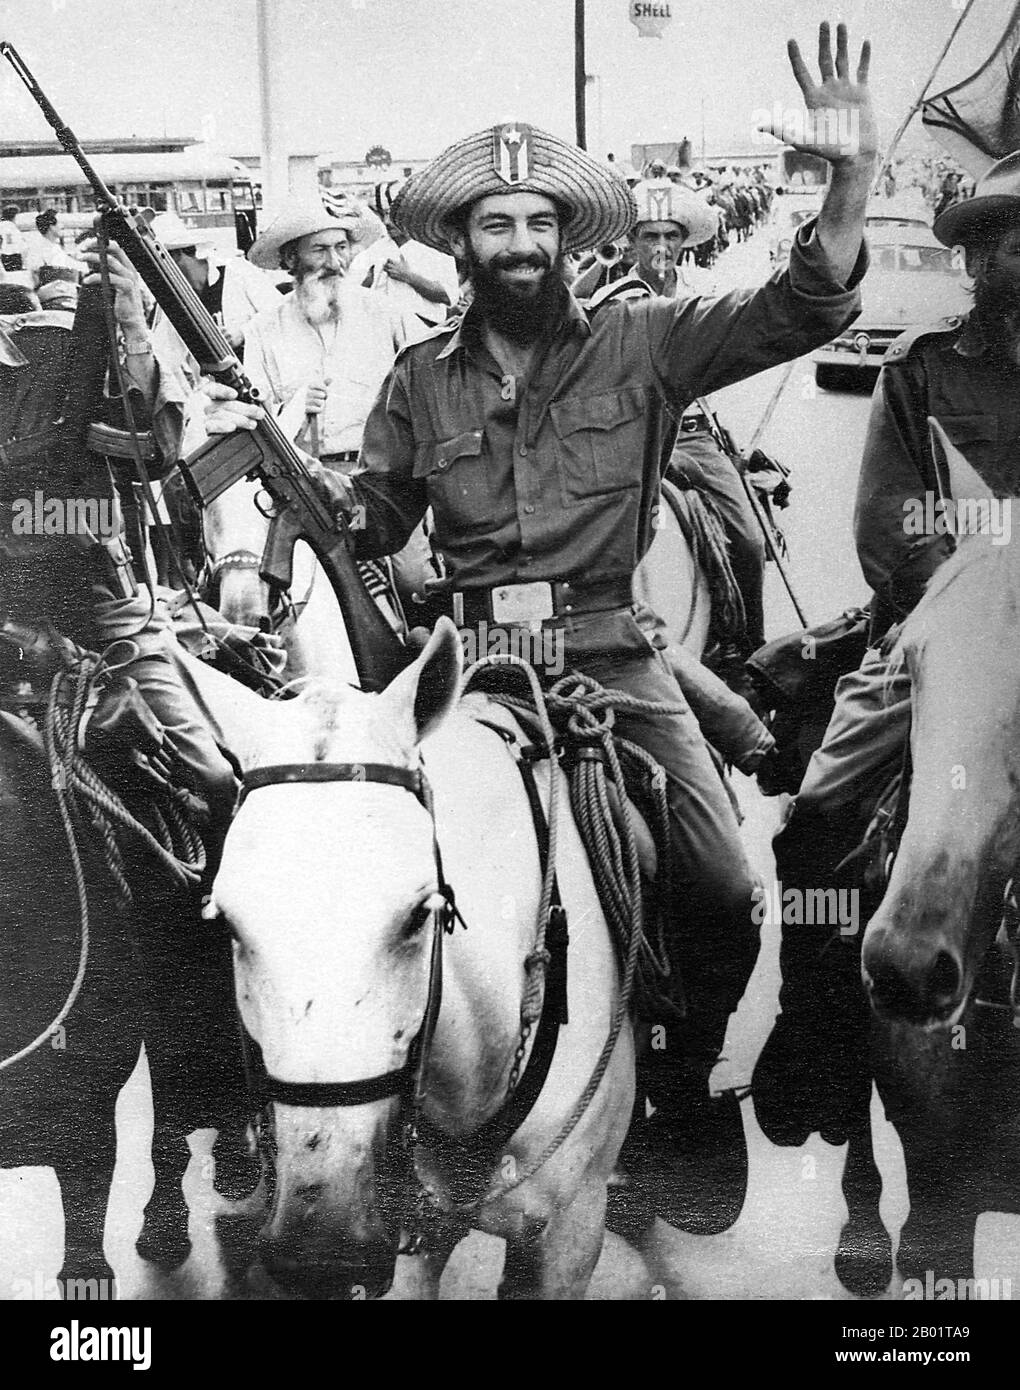 Cuba: Camilo Cienfuegos (6 February 1932 - 28 October 1959) after his victory at Yaguajay, c. January 1959.  Camilo Cienfuegos Gorriarán was a Cuban revolutionary born in Lawton, Havana. Raised in an anarchist family that had left Spain before the Spanish Civil War, he became a key figure of the Cuban Revolution, along with Fidel Castro, Che Guevara, Juan Almeida Bosque and Raúl Castro; he was considered second only to Fidel Castro among the revolutionary leadership. While flying back from Camagüey, his plane disappeared over the Straits of Florida and he was presumed dead. Stock Photo